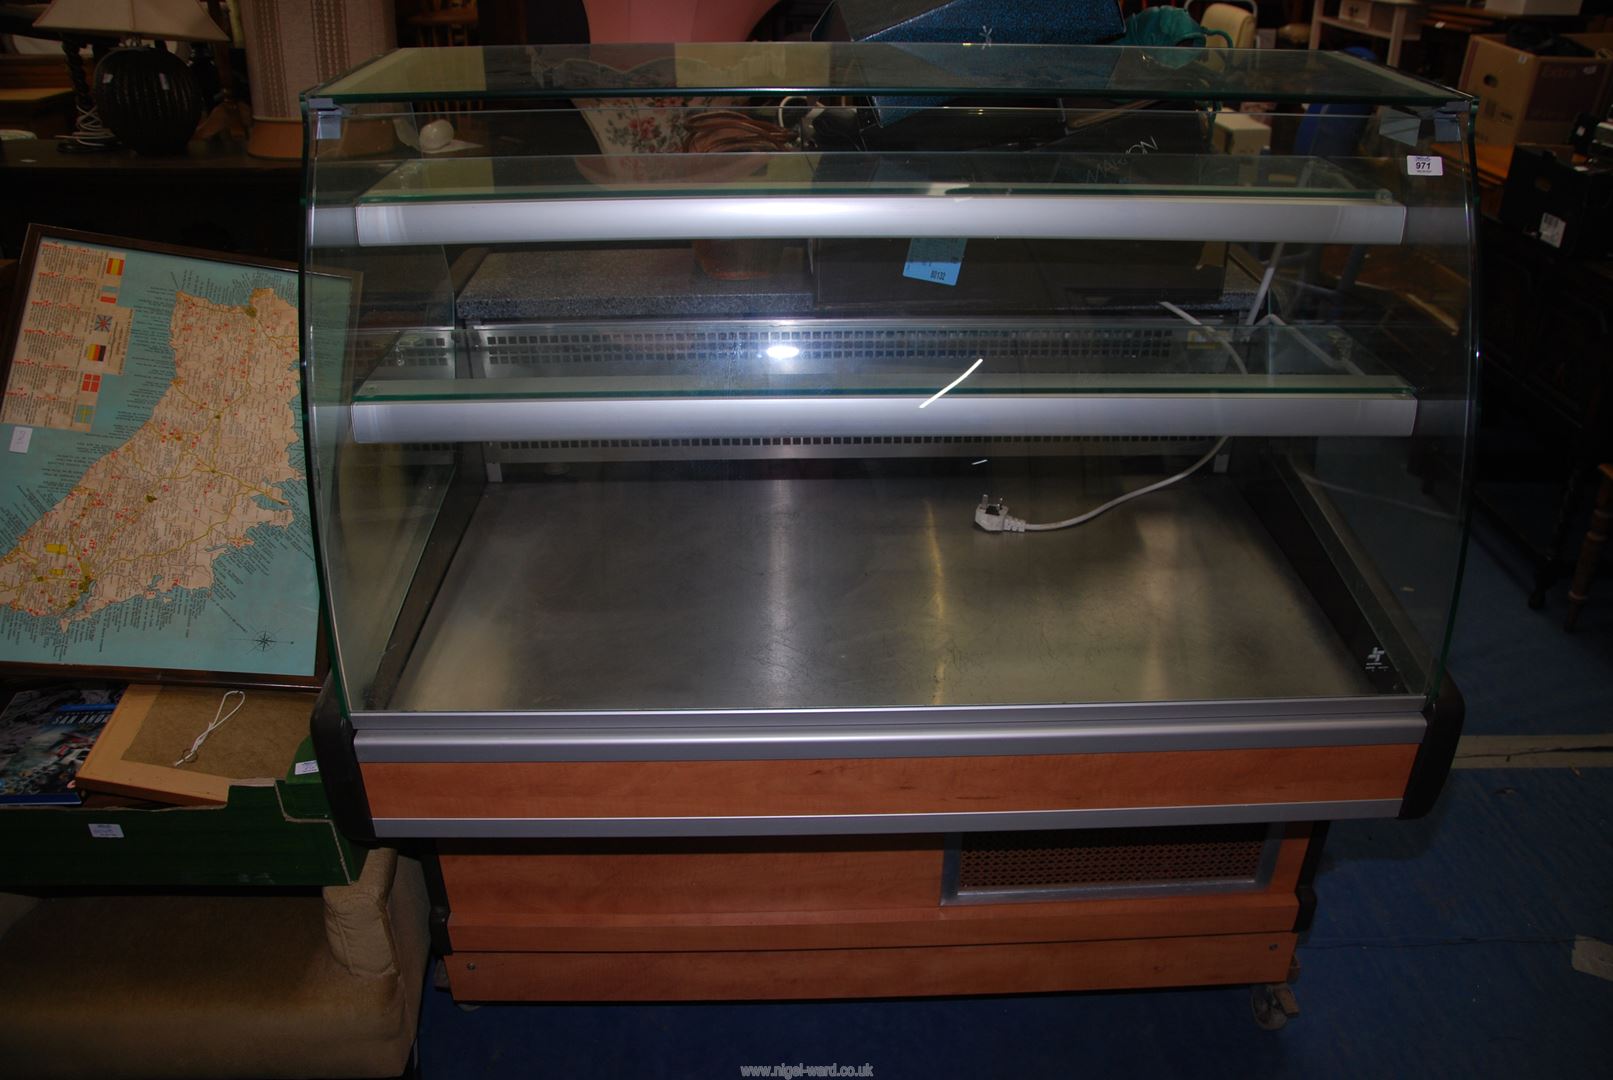 A chilled Patisserie Display Counter/Fridge by Mafirol, in good working order, 1.3 m x .95 m x 1. - Image 2 of 3